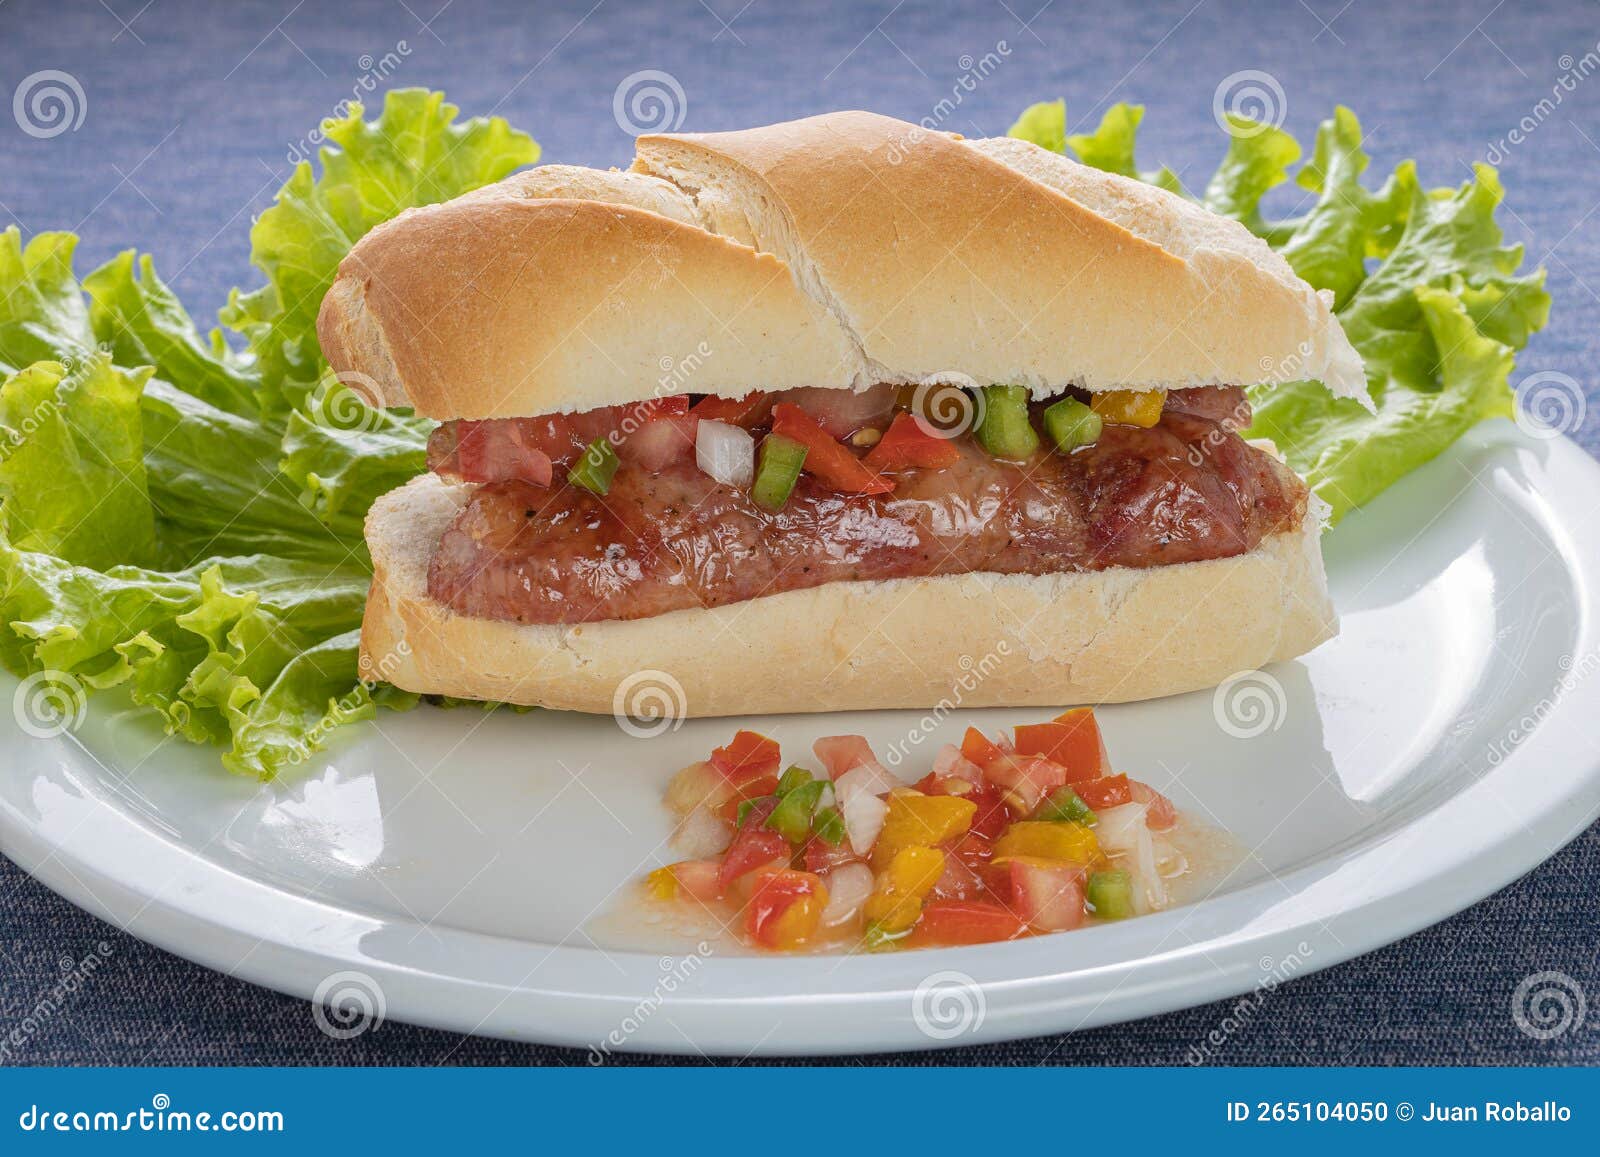 Choripan, Typical Argentine Sandwich with Chorizo and Creole Sauce on a ...